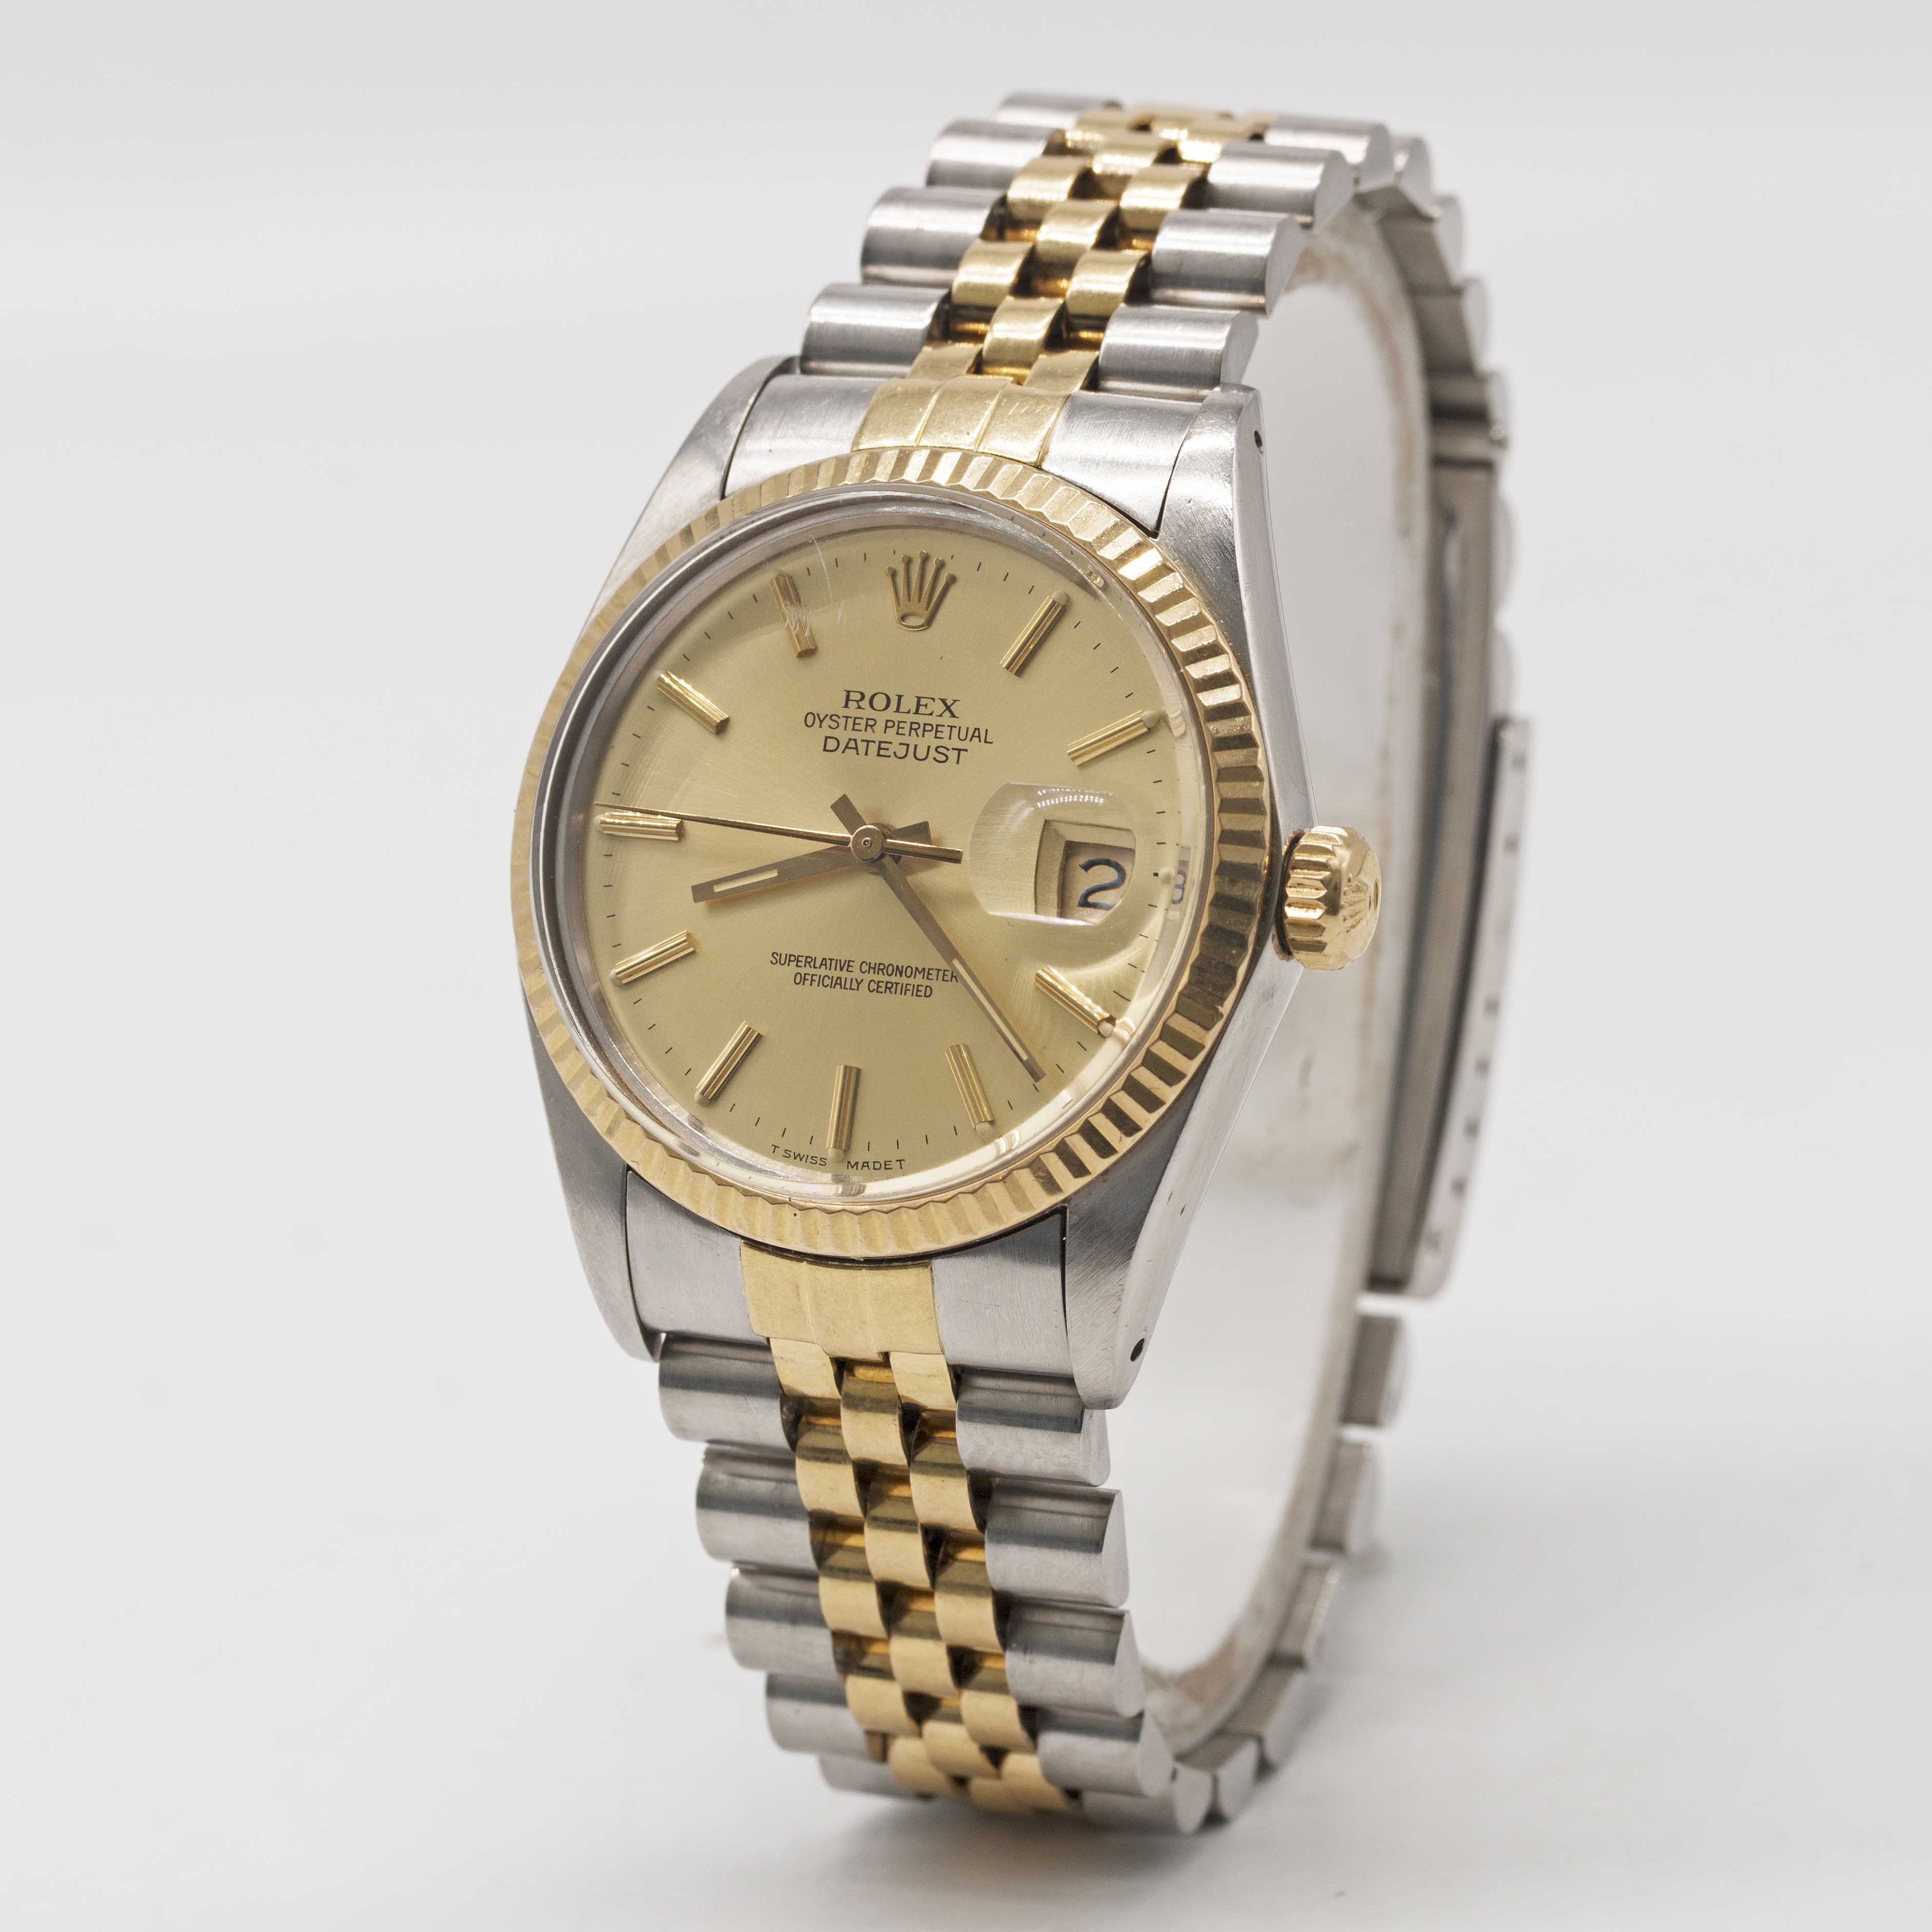 A GENTLEMAN'S STEEL & GOLD ROLEX OYSTER PERPETUAL DATEJUST BRACELET WATCH CIRCA 1985, REF. 16013 - Image 3 of 7